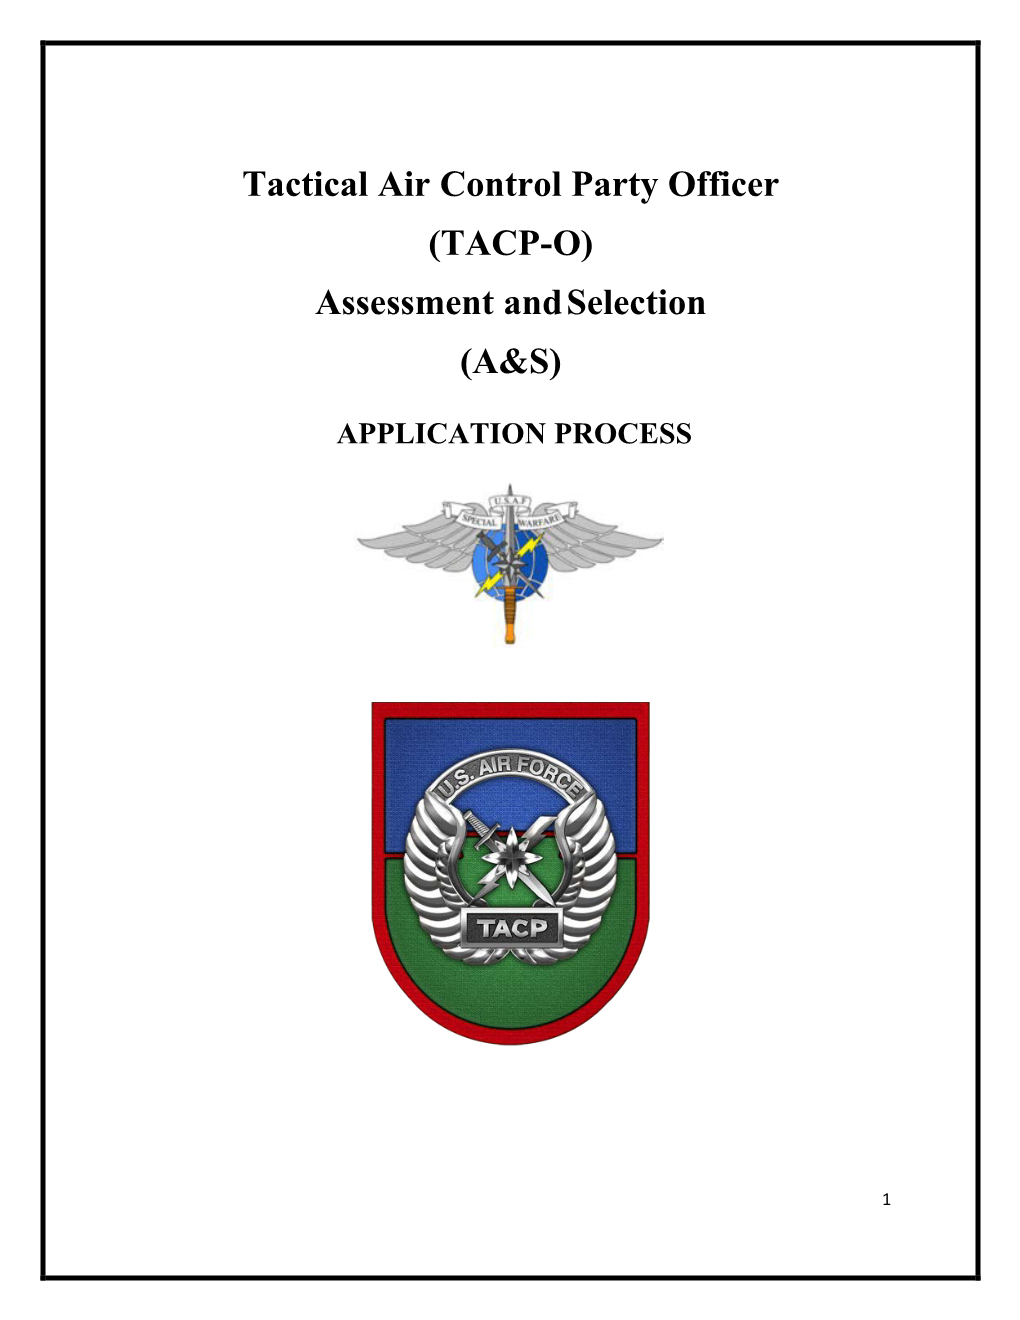 Tactical Air Control Party Officer (TACP-O) Assessment and Selection